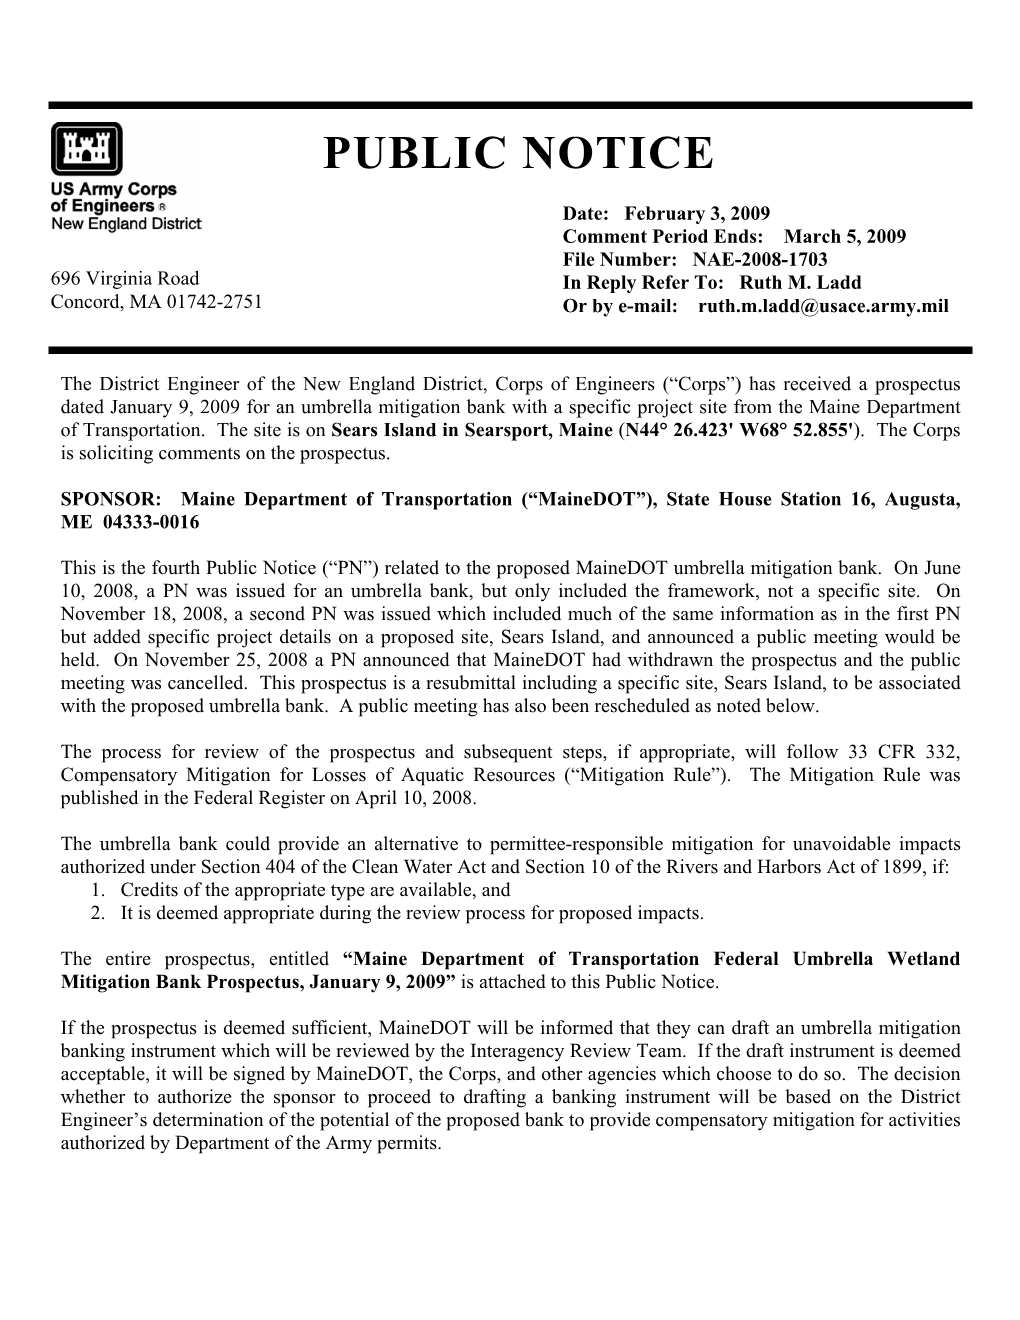 Umbrella Mitigation Meeting Notice and Plan for Sears Island